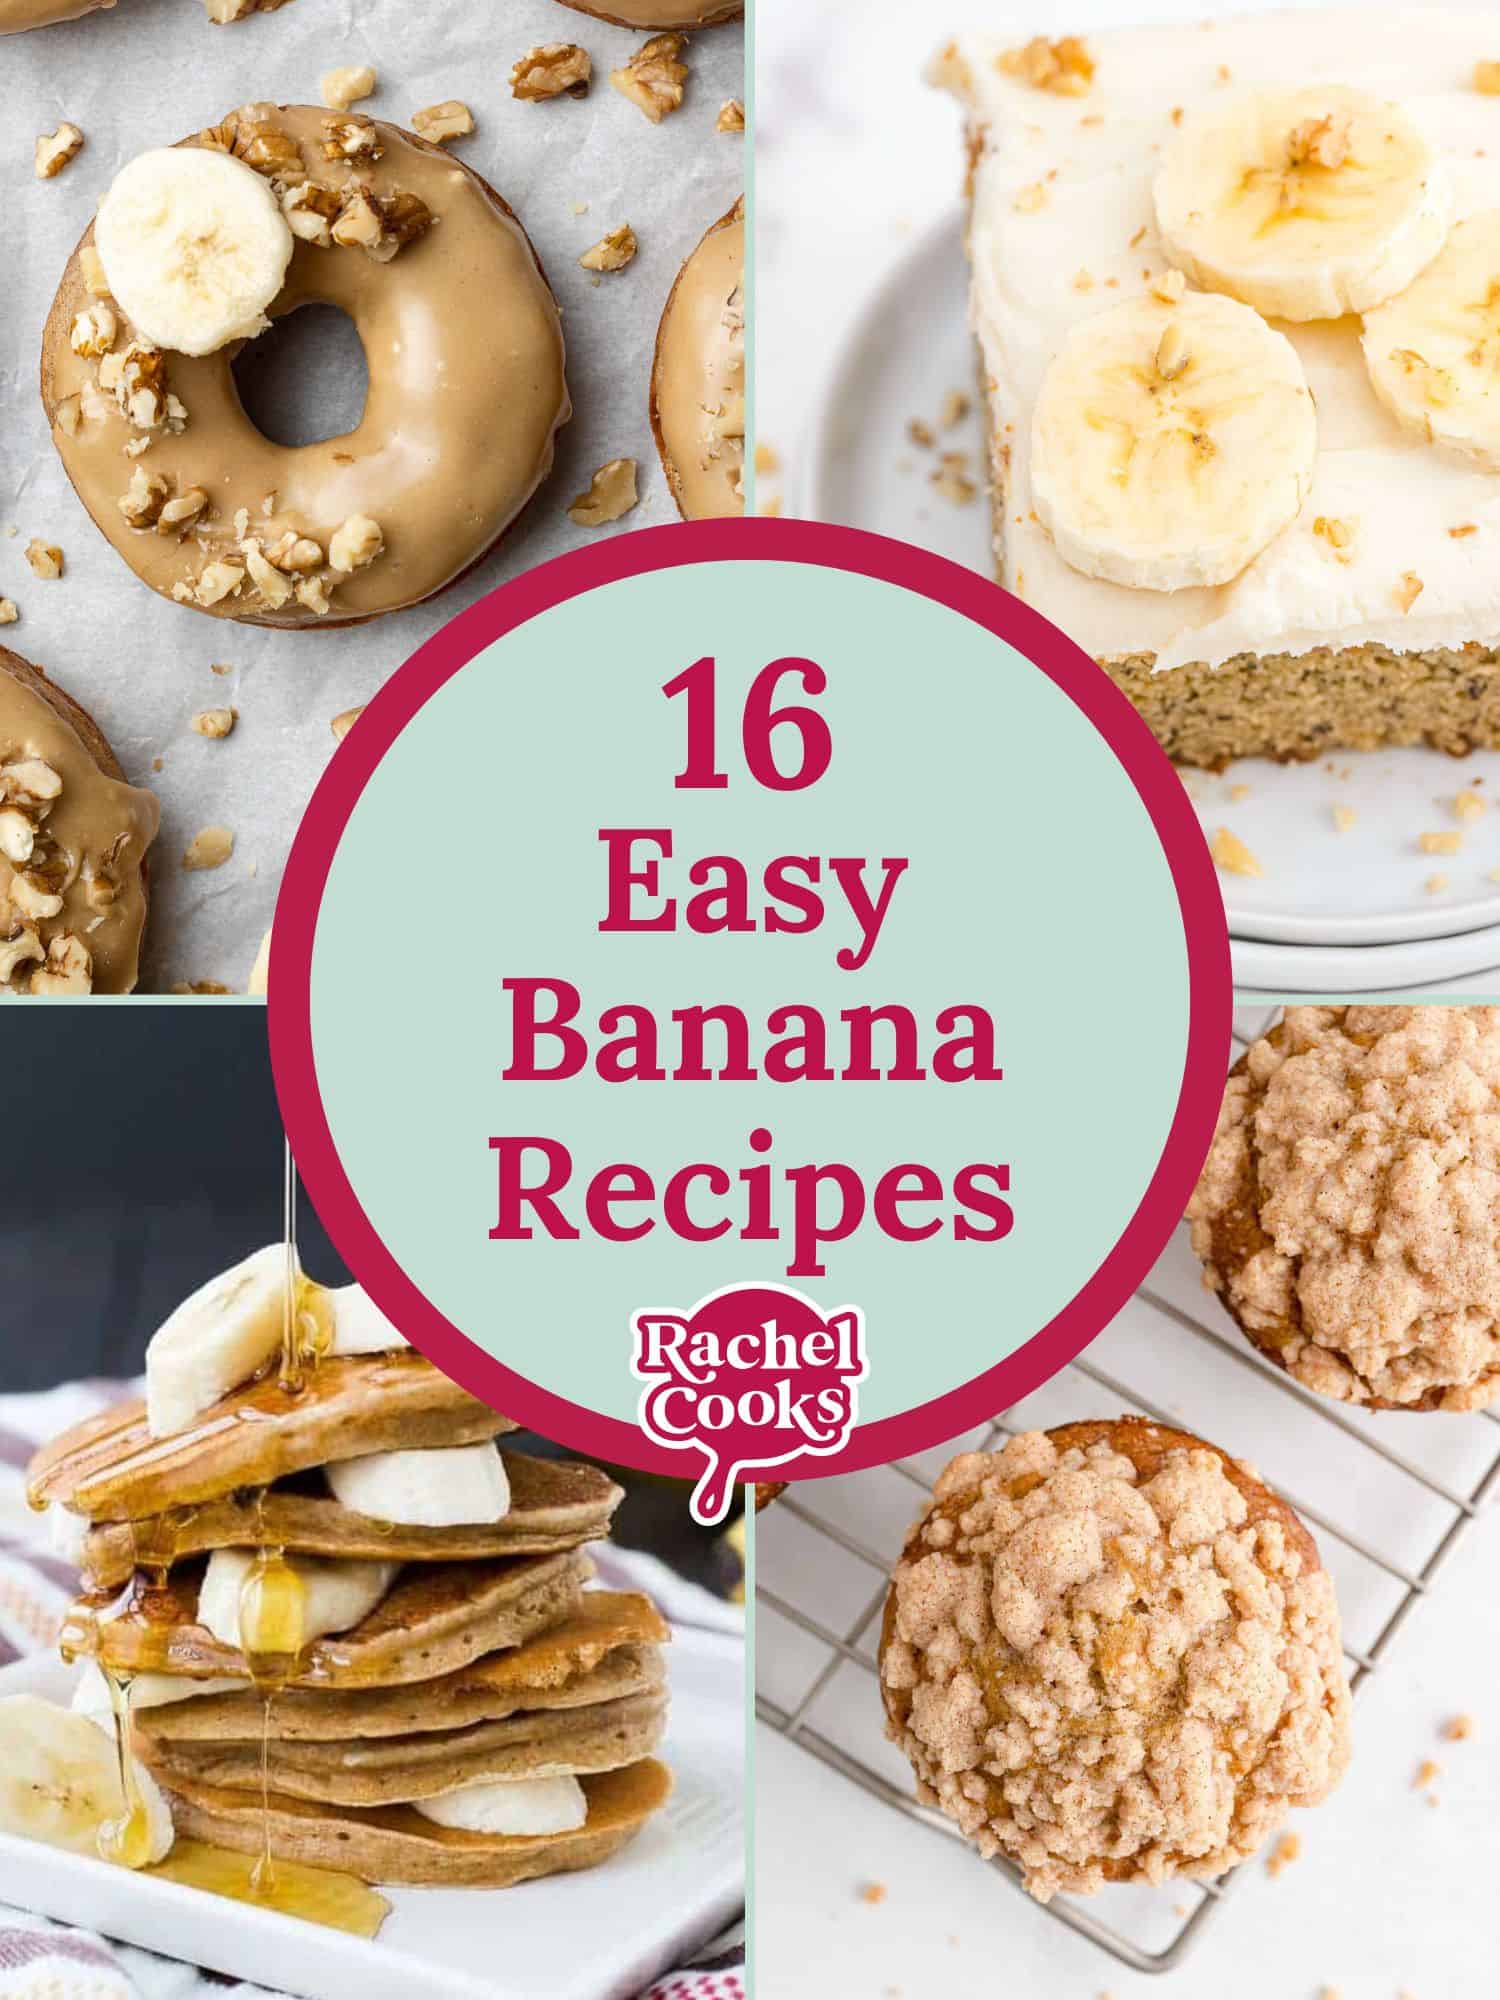 Four recipe images, text overlay reads "16 easy banana recipes."